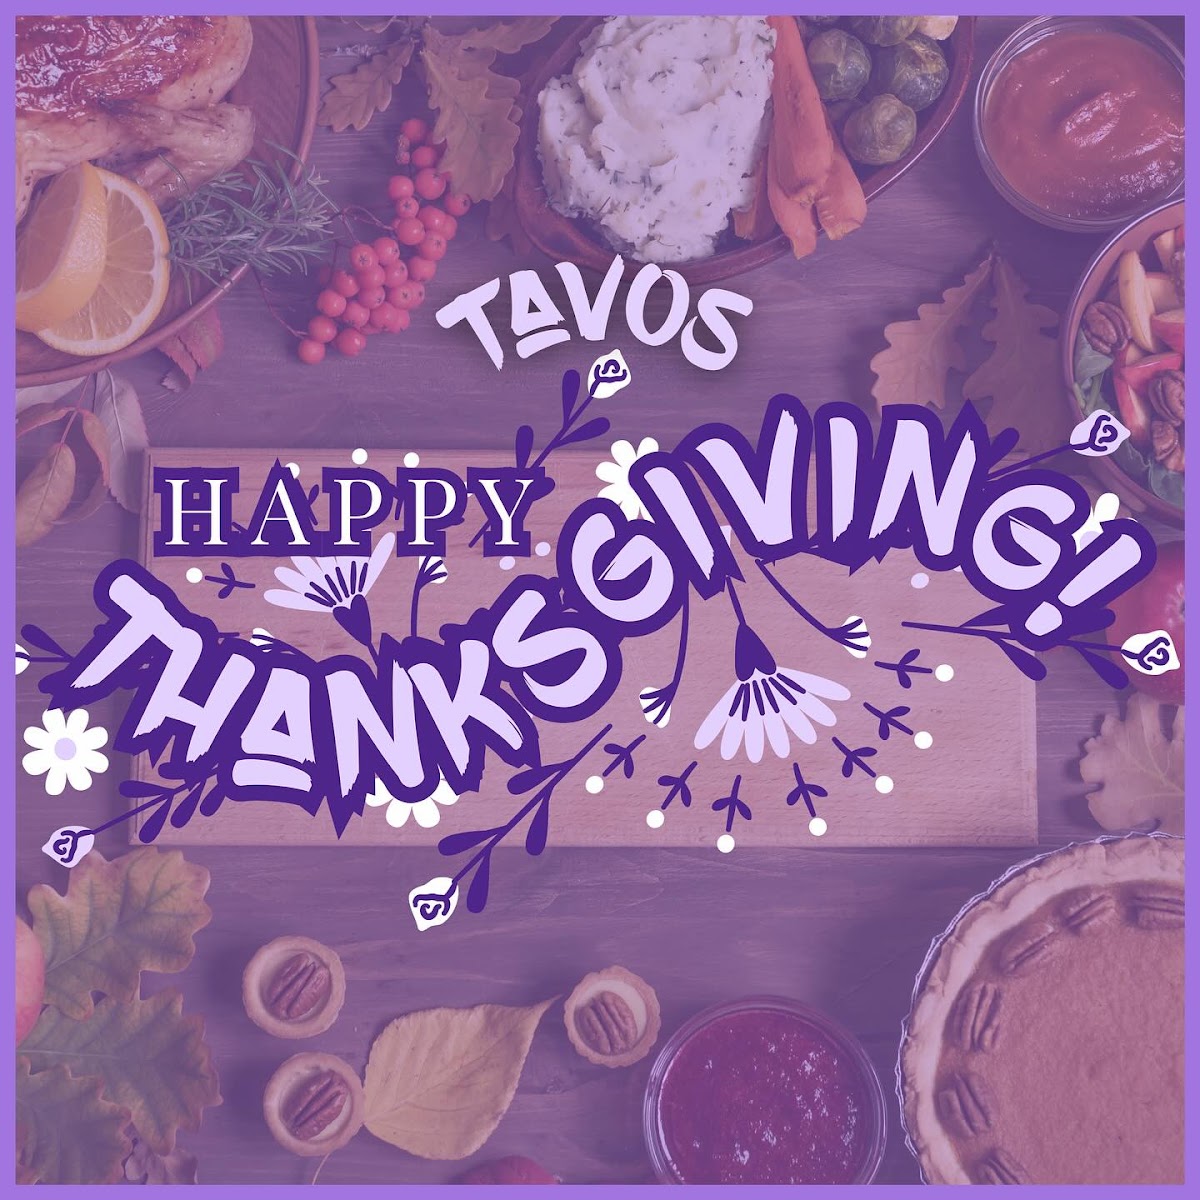 Happy Thanksgiving, Amigos! 🦃🍂

Sick of turkey already? Swap the traditional feast for a flavorful fiesta at Tavos tonight! We're closed tomorrow but open today, Friday, and Saturday with our normal 11am-9pm hours for your post-Thanksgiving escape. Let the feasting continue with a Mexican twist! 🌮✨